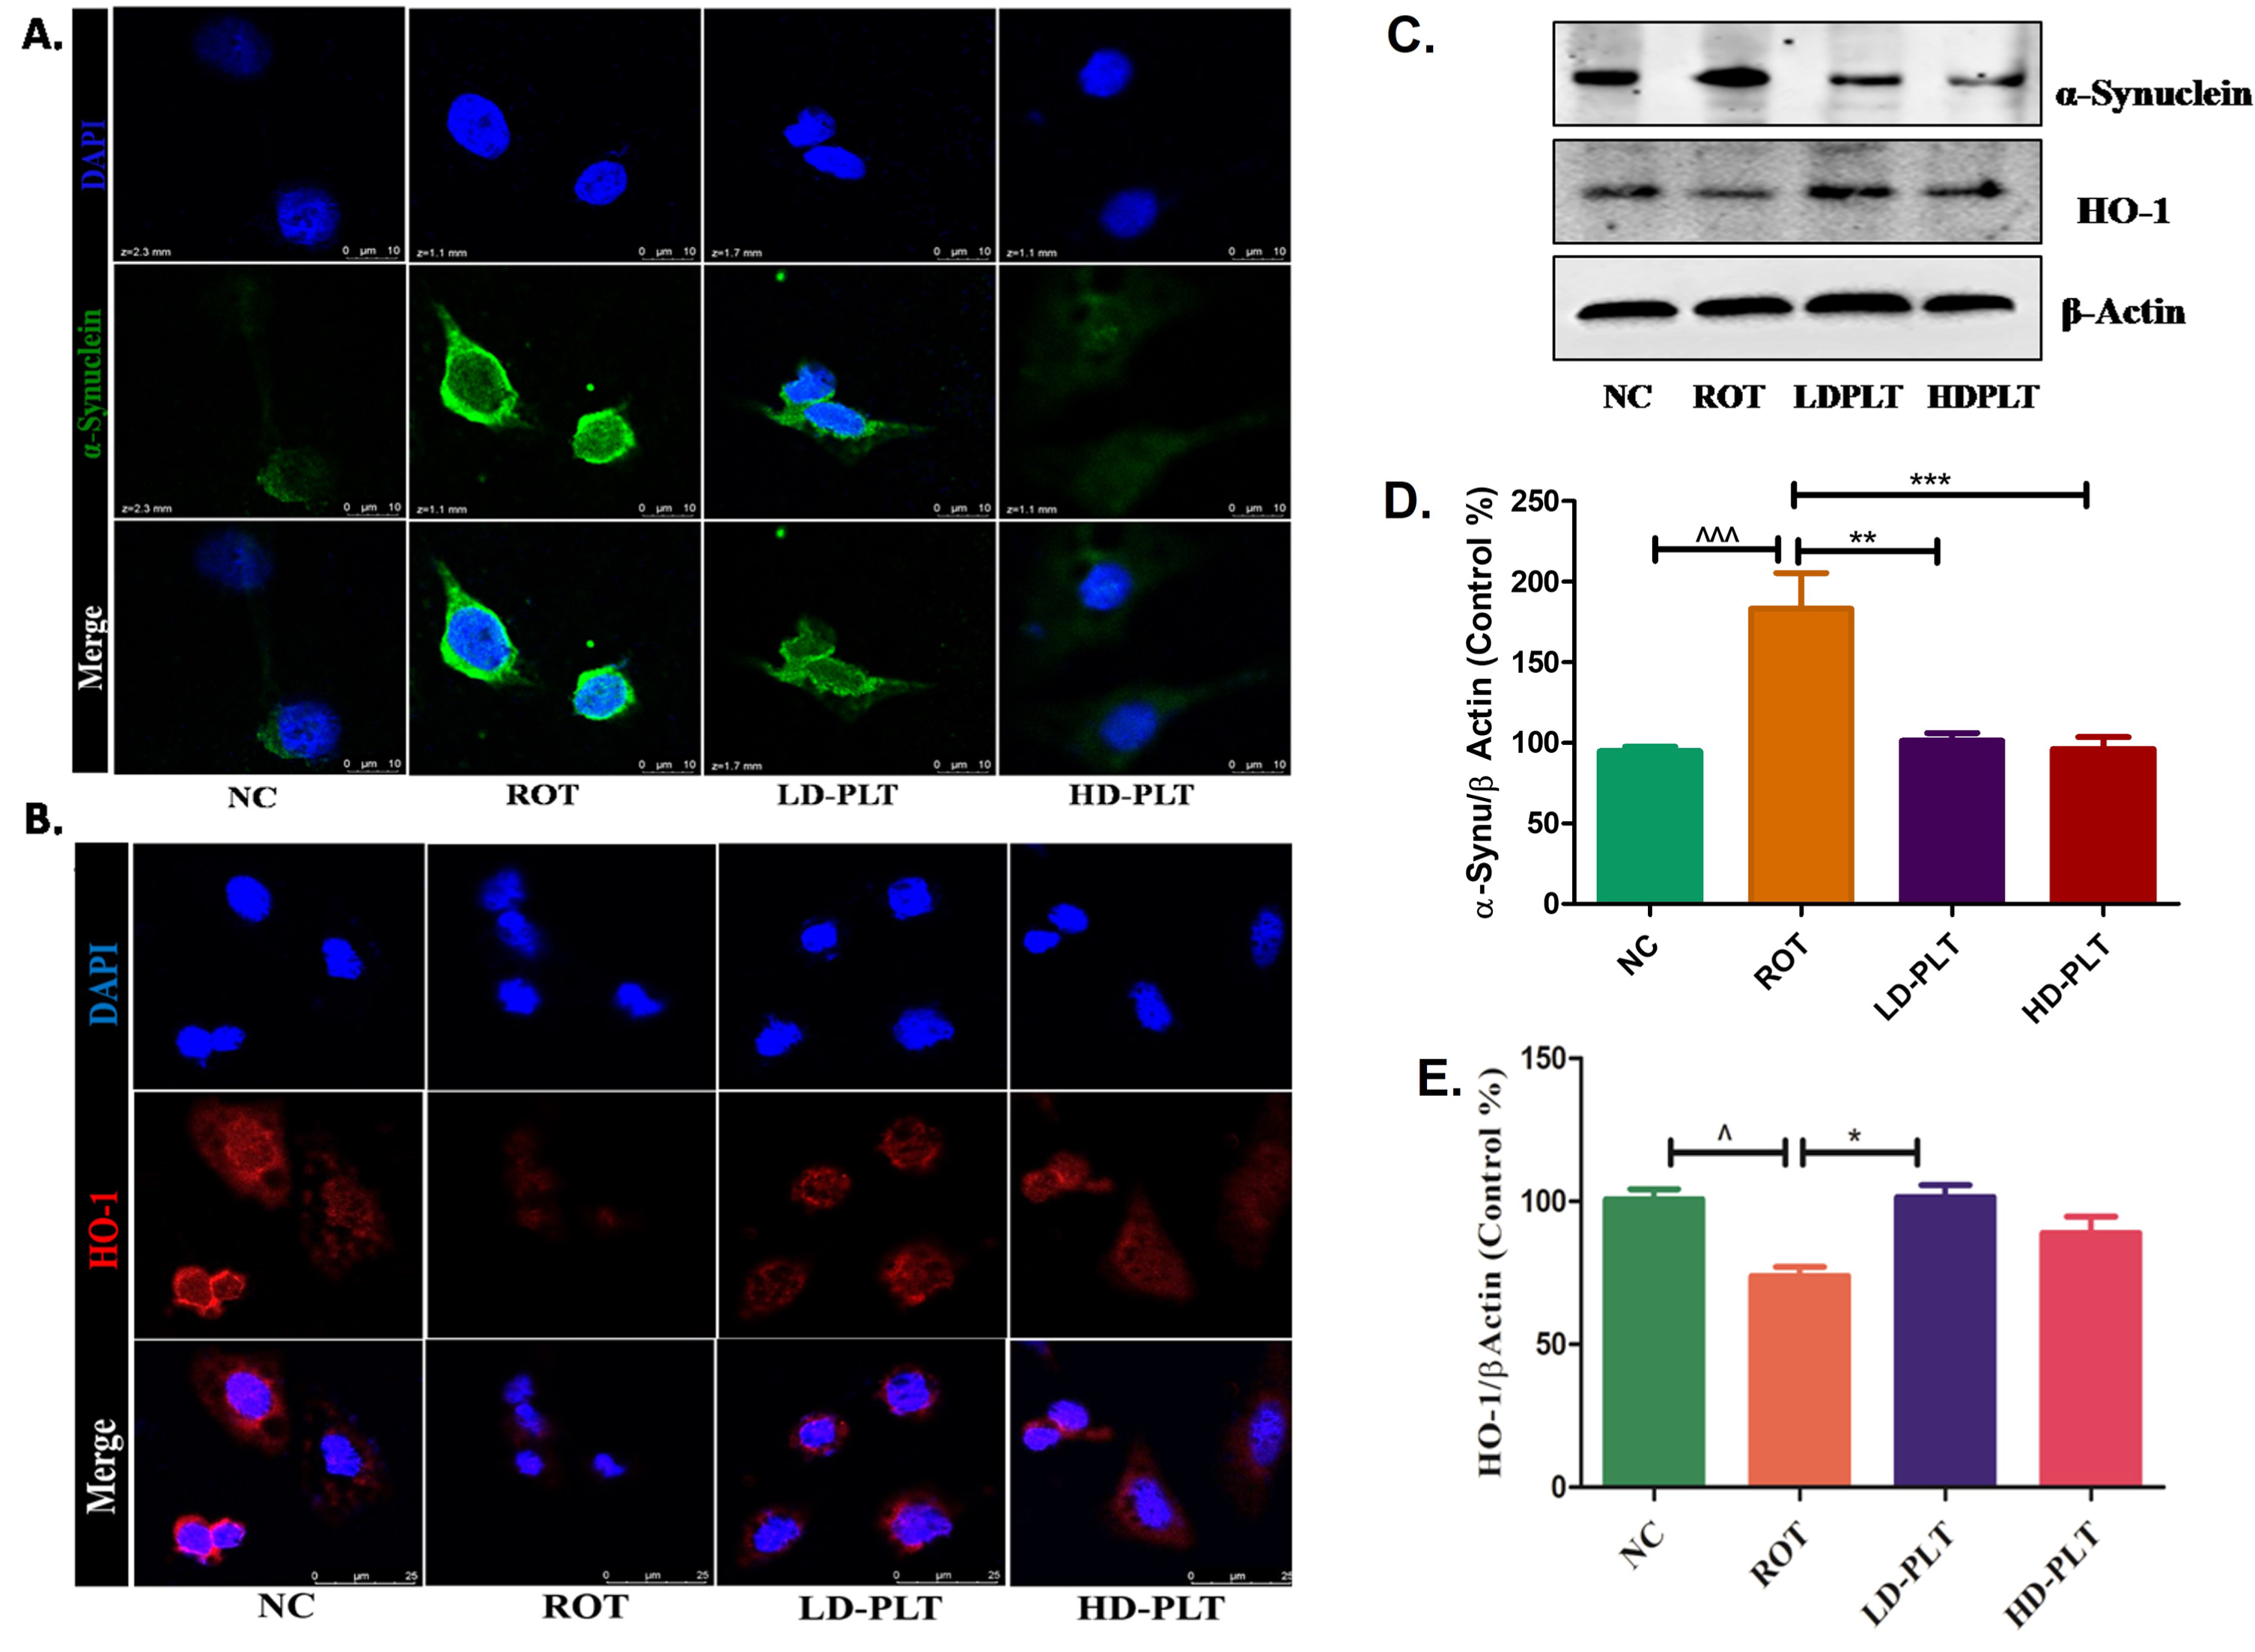 Effect of PLT exposure on antioxidant mechanism in ROT-exposed SH-SY5Y cells. Representative IF images of SH-SY5Y cells labeled with A) α-Synuclein, B) HO-1. C) The protein expression of α-Synuclein and HO-1 in PLT and ROT exposed SH-SY5Ycells by western blotting. Quantitative analysis of D) α-Synuclein and E) HO-1 using Image J software. The results obtained are represented as mean±SEM (n = 3). ***p < 0.001, **p < 0.01 and *p < 0.05 versus ROT.